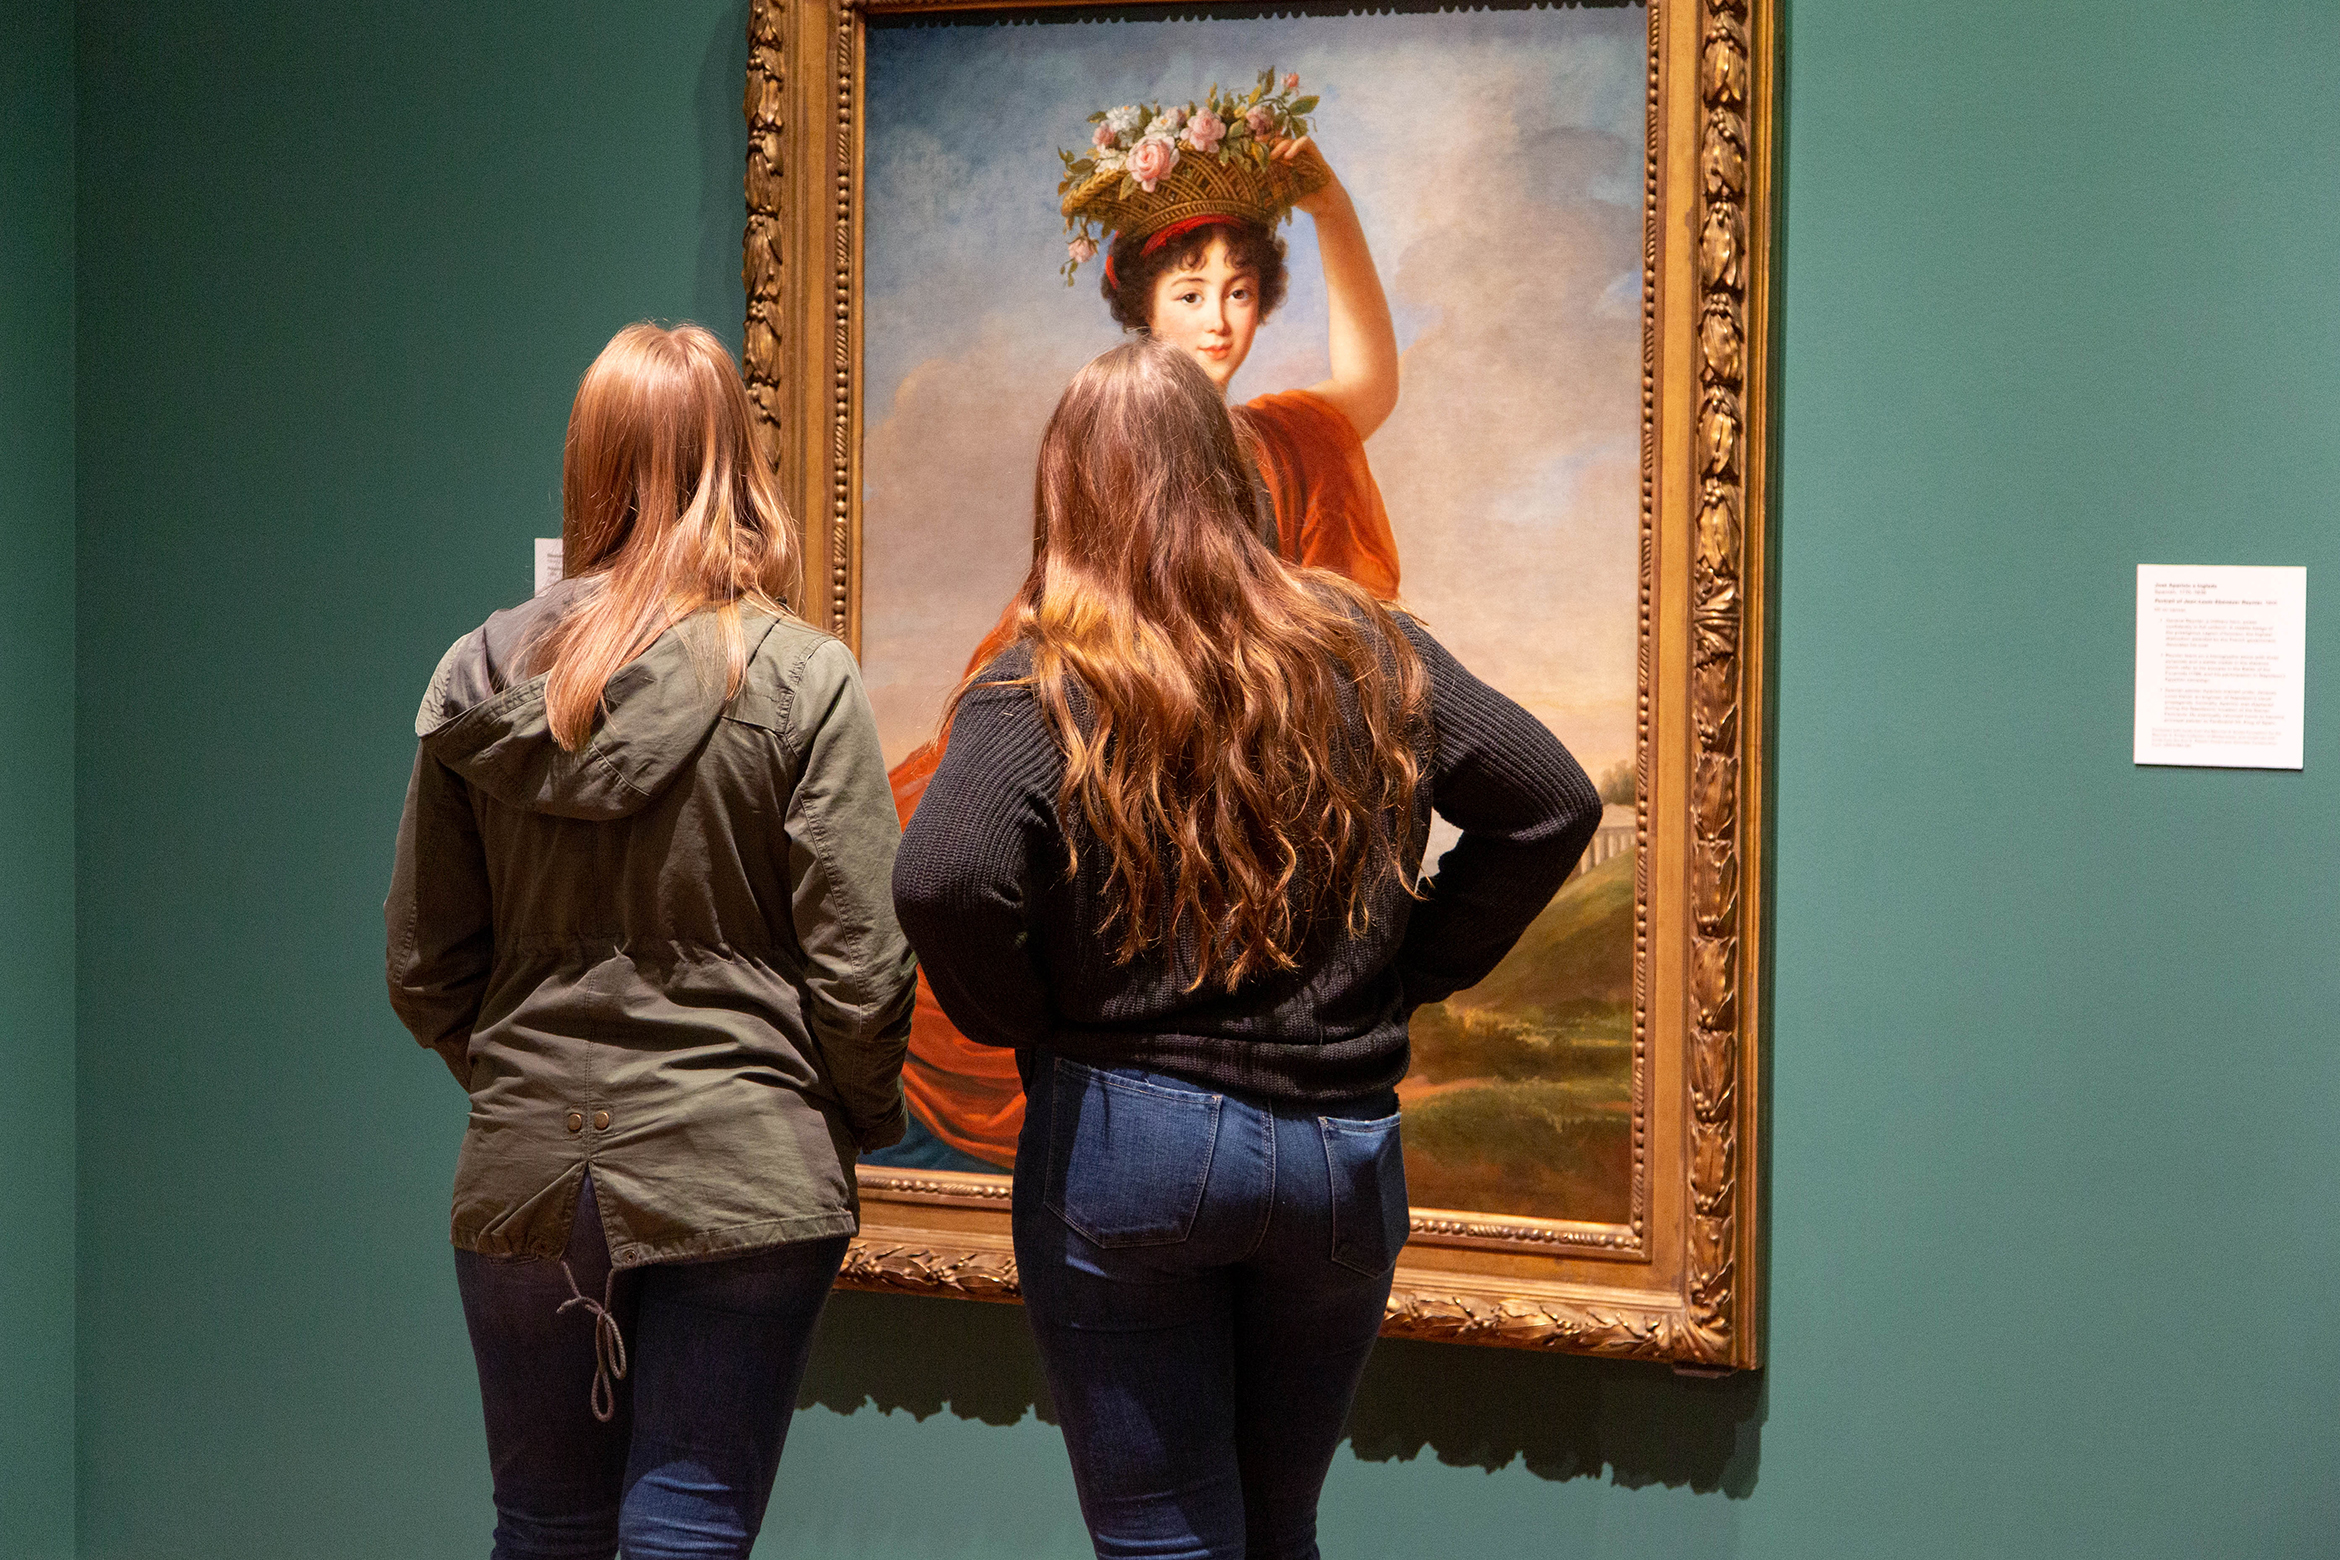 Two women with long hair stand and stare at a large, gold-framed oil painting of a woman with a basket of flowers on her head.